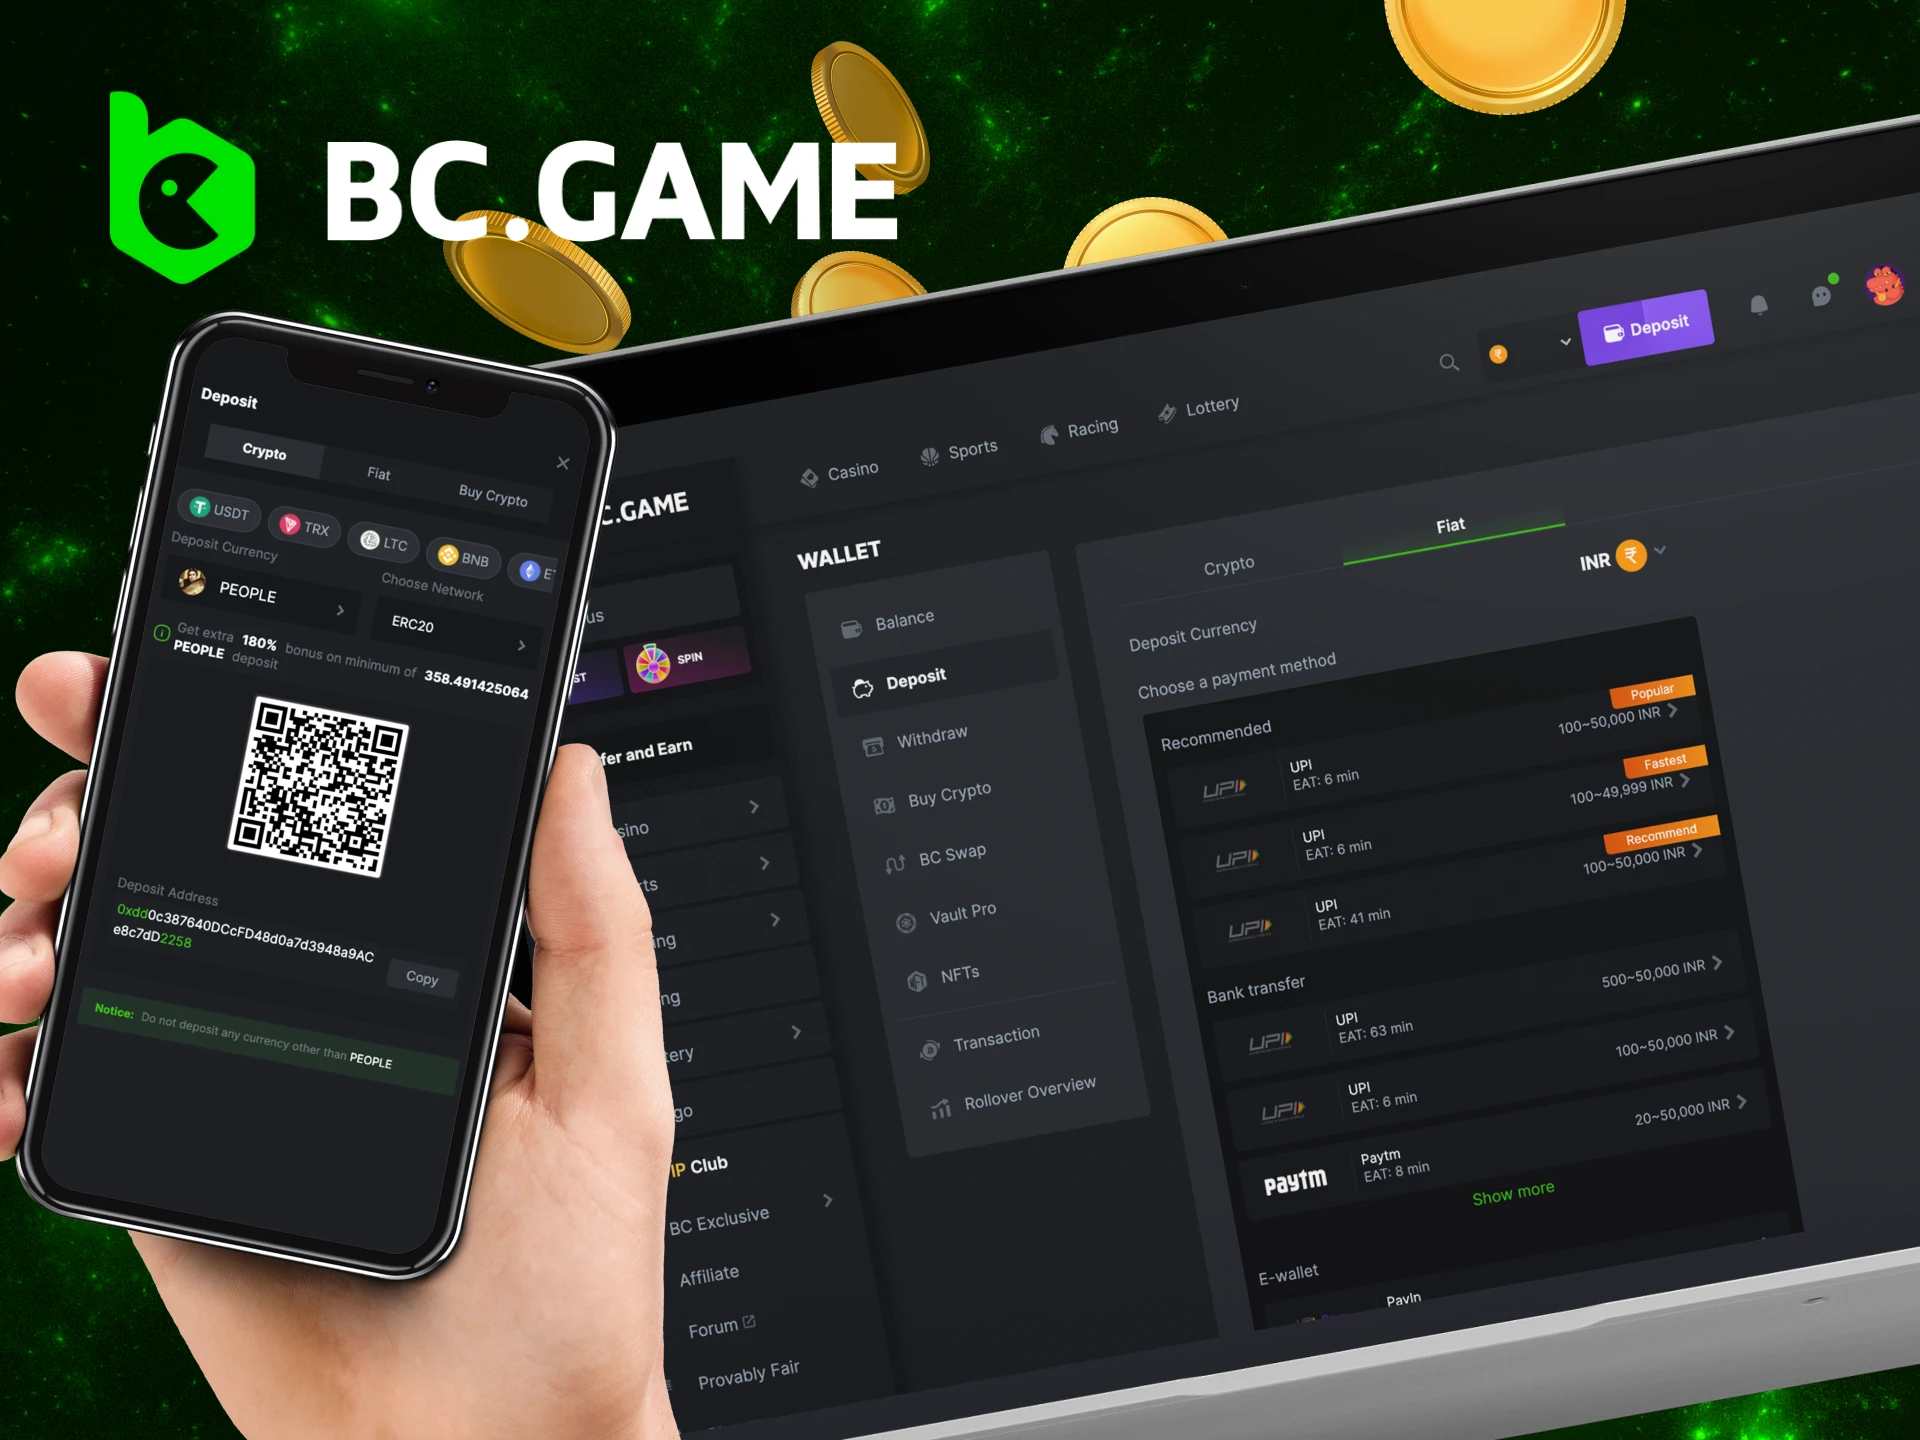 Instructions on how to deposit money into your account at the BC.Game online casino to place bets.